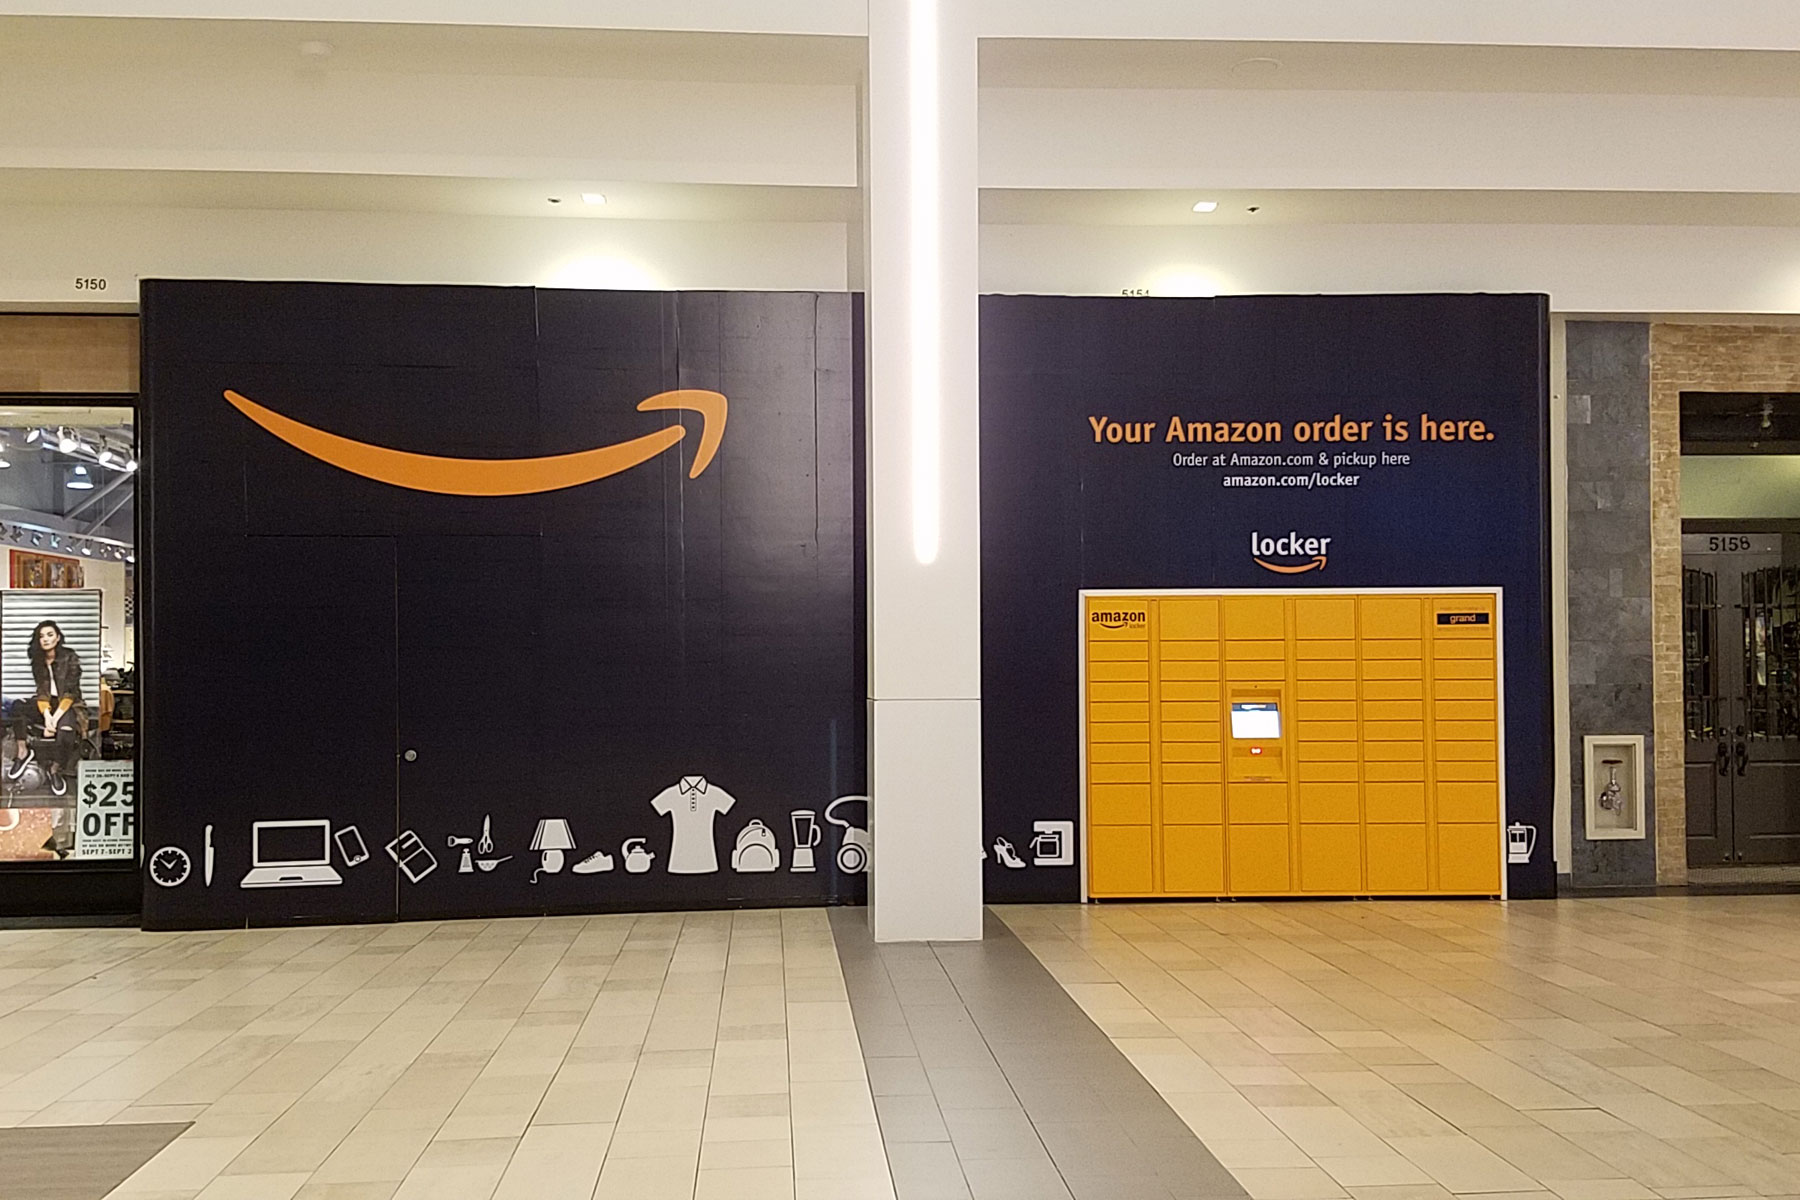 Establishing a New Brand – Using Retail Barricades for Launching a New Store